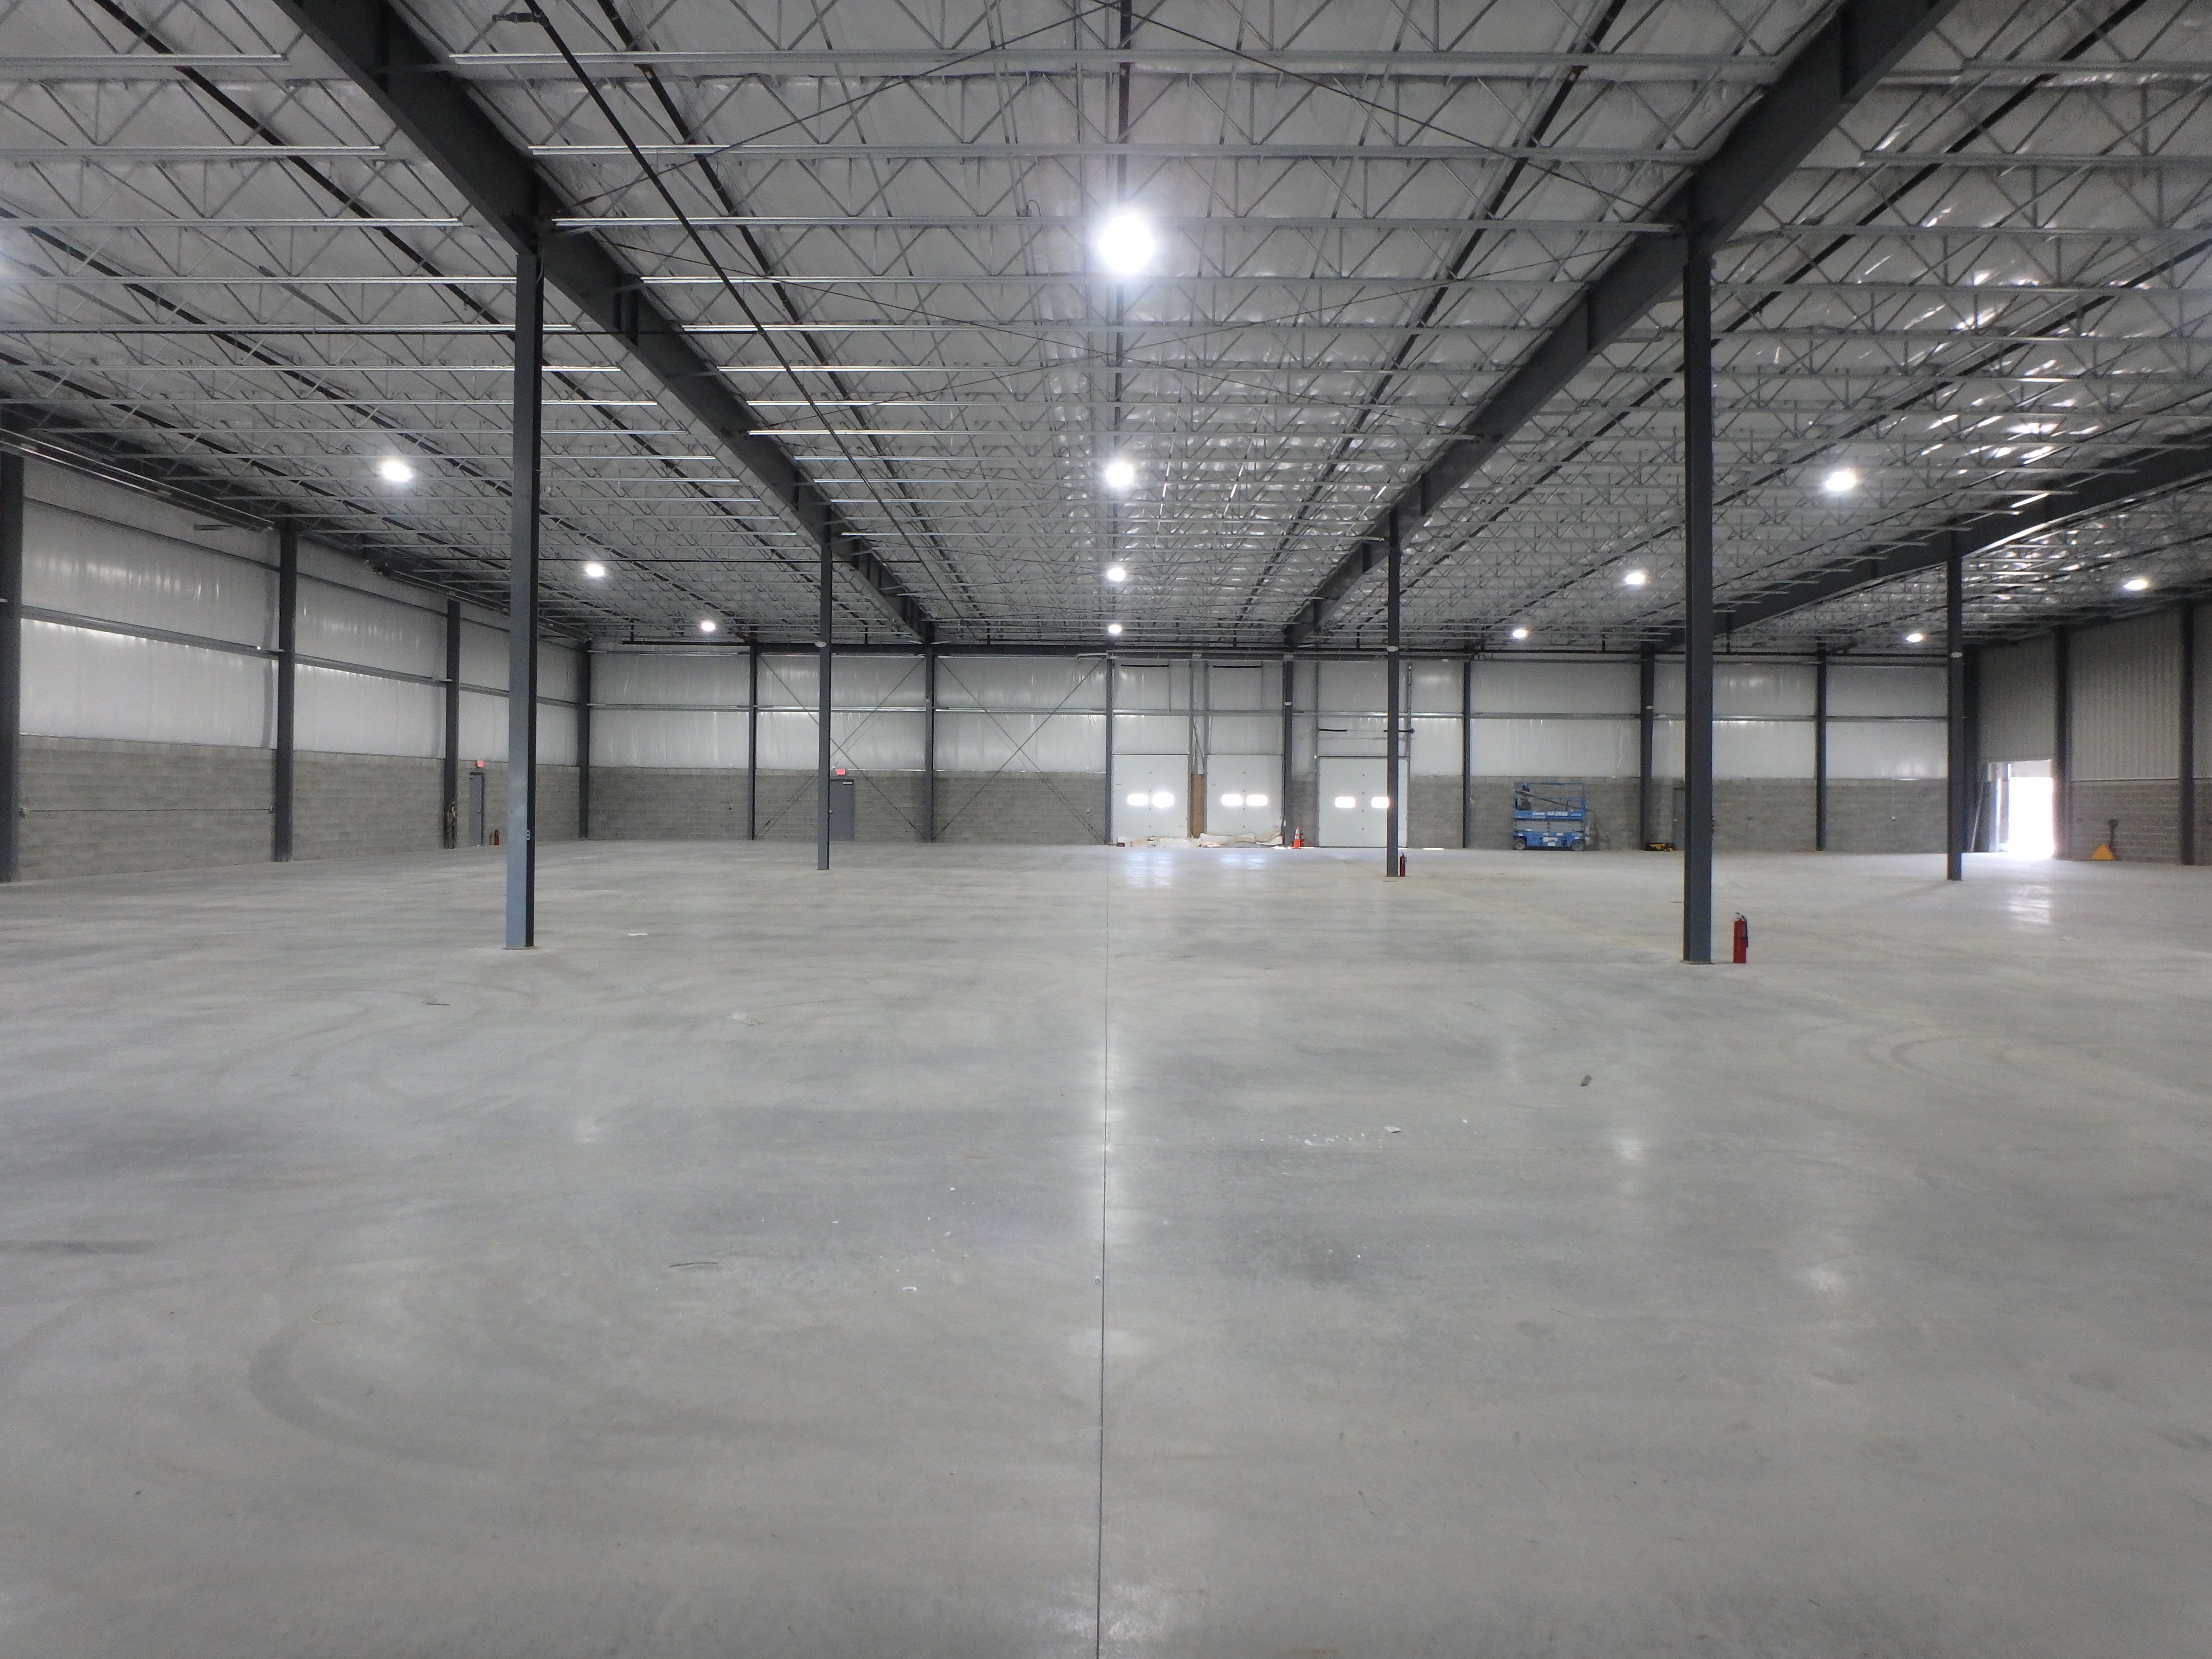 45,000 sq ft 24 feet ceiling height